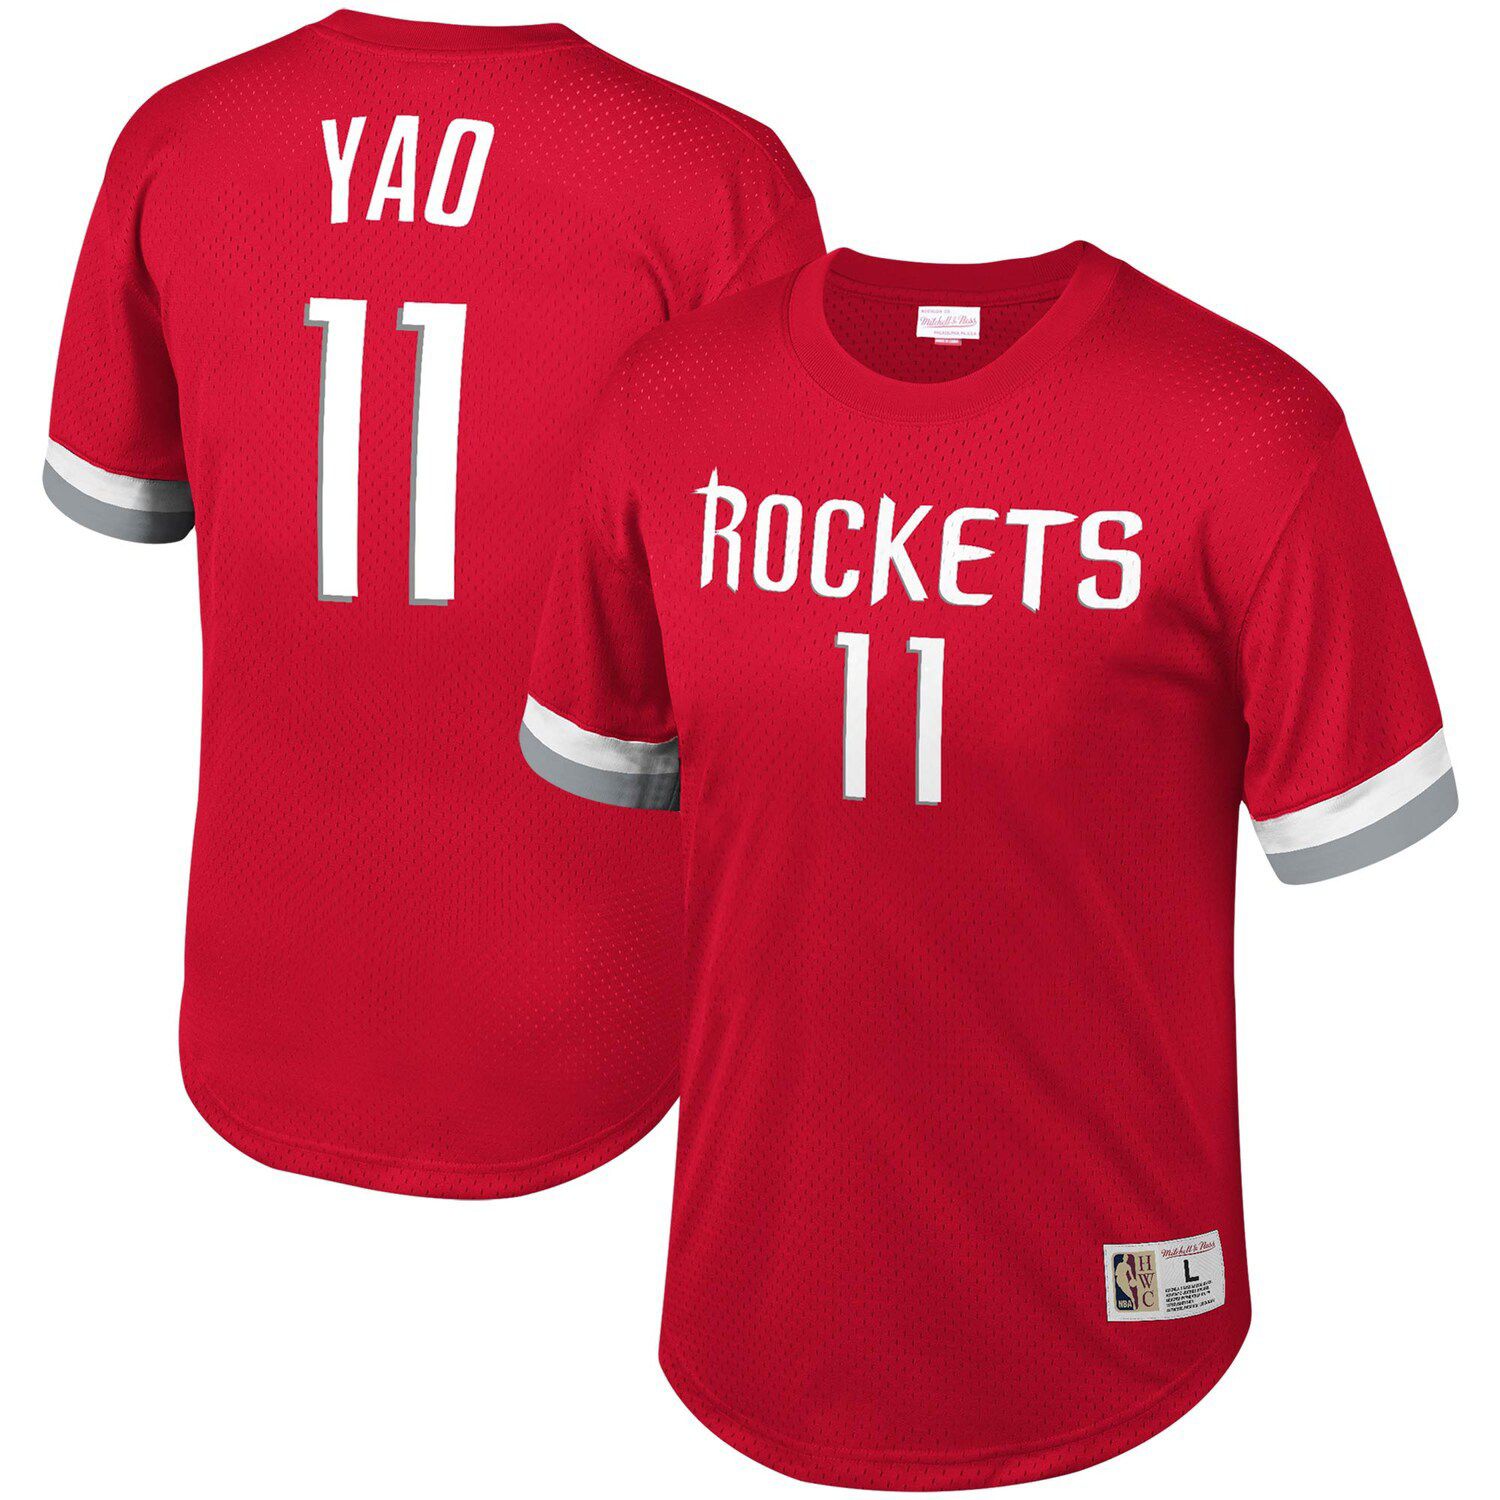 Image for Unbranded Men's Mitchell & Ness Yao Ming Red Houston Rockets Mesh T-Shirt at Kohl's.